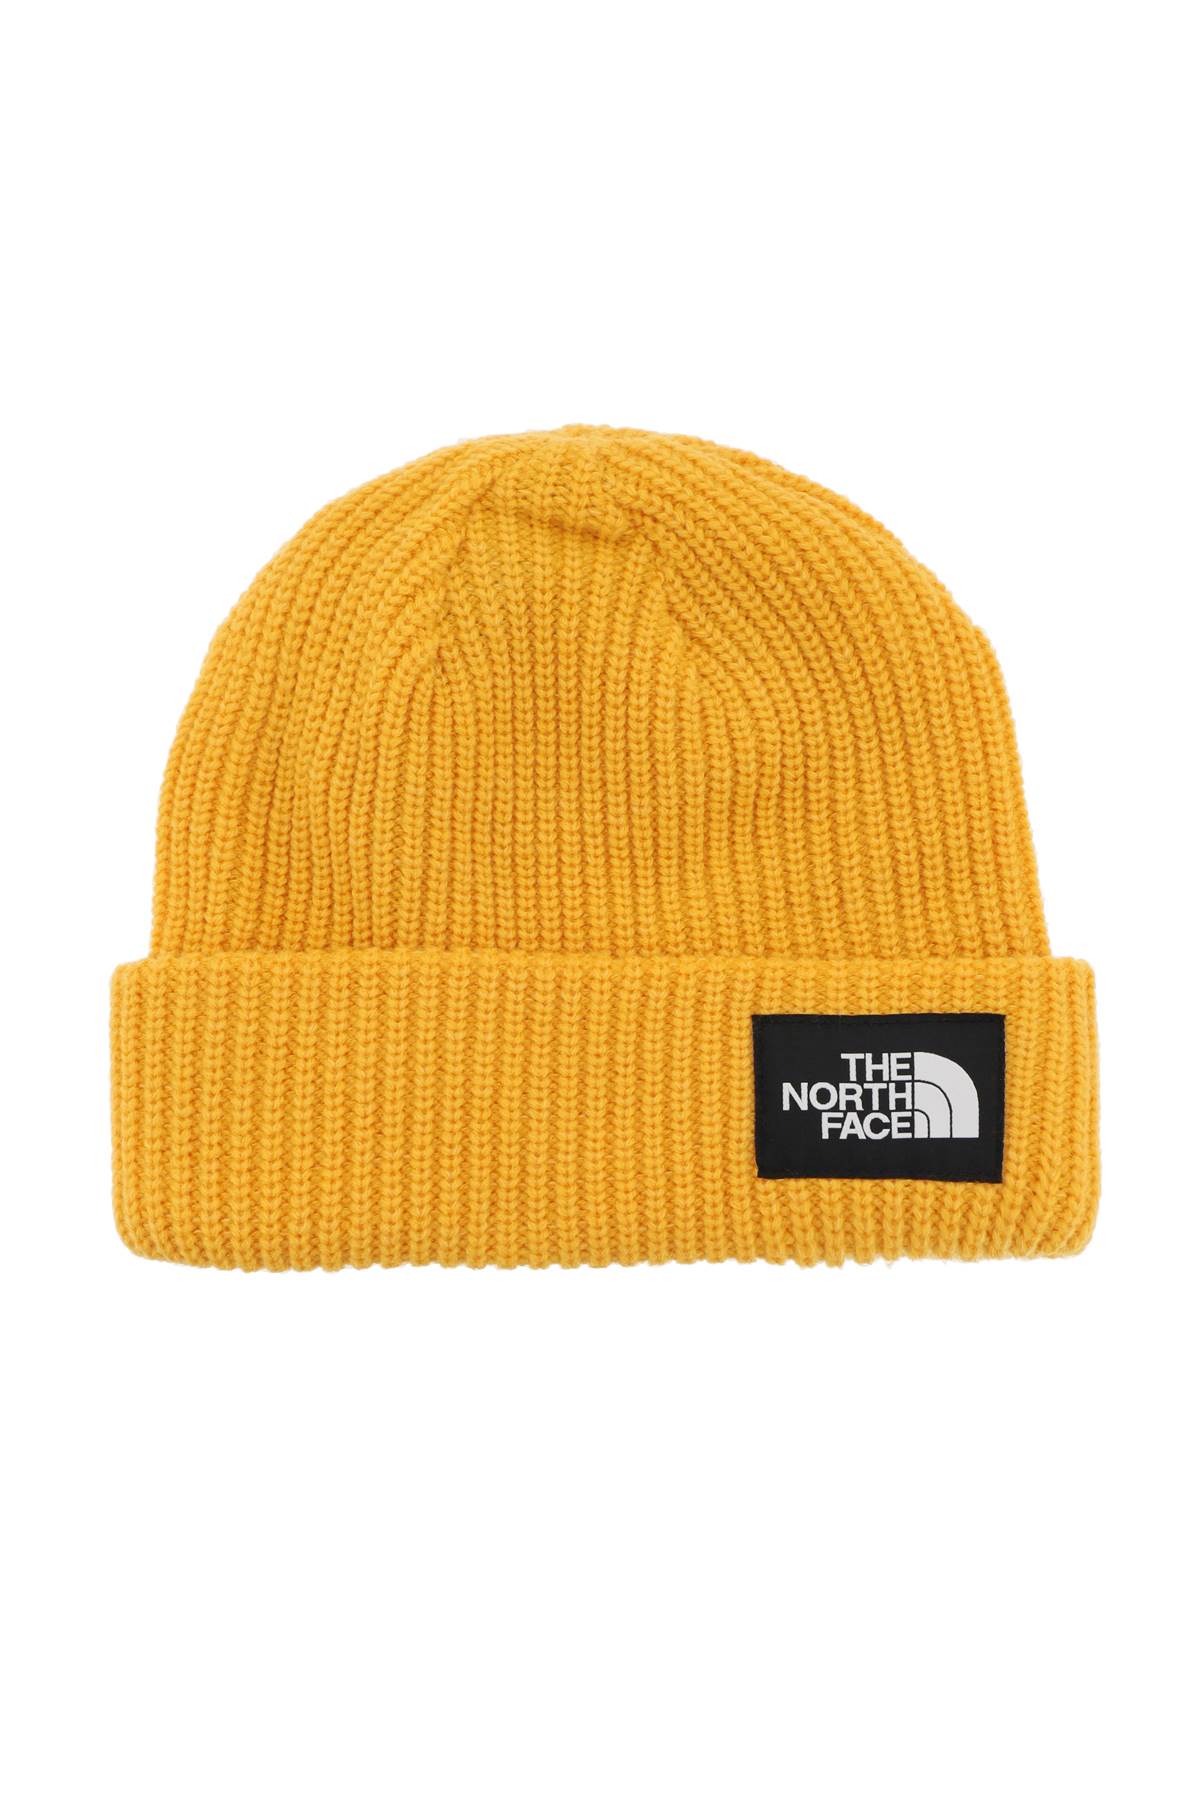 THE NORTH FACE - Bonnet Salty Dog Mixte